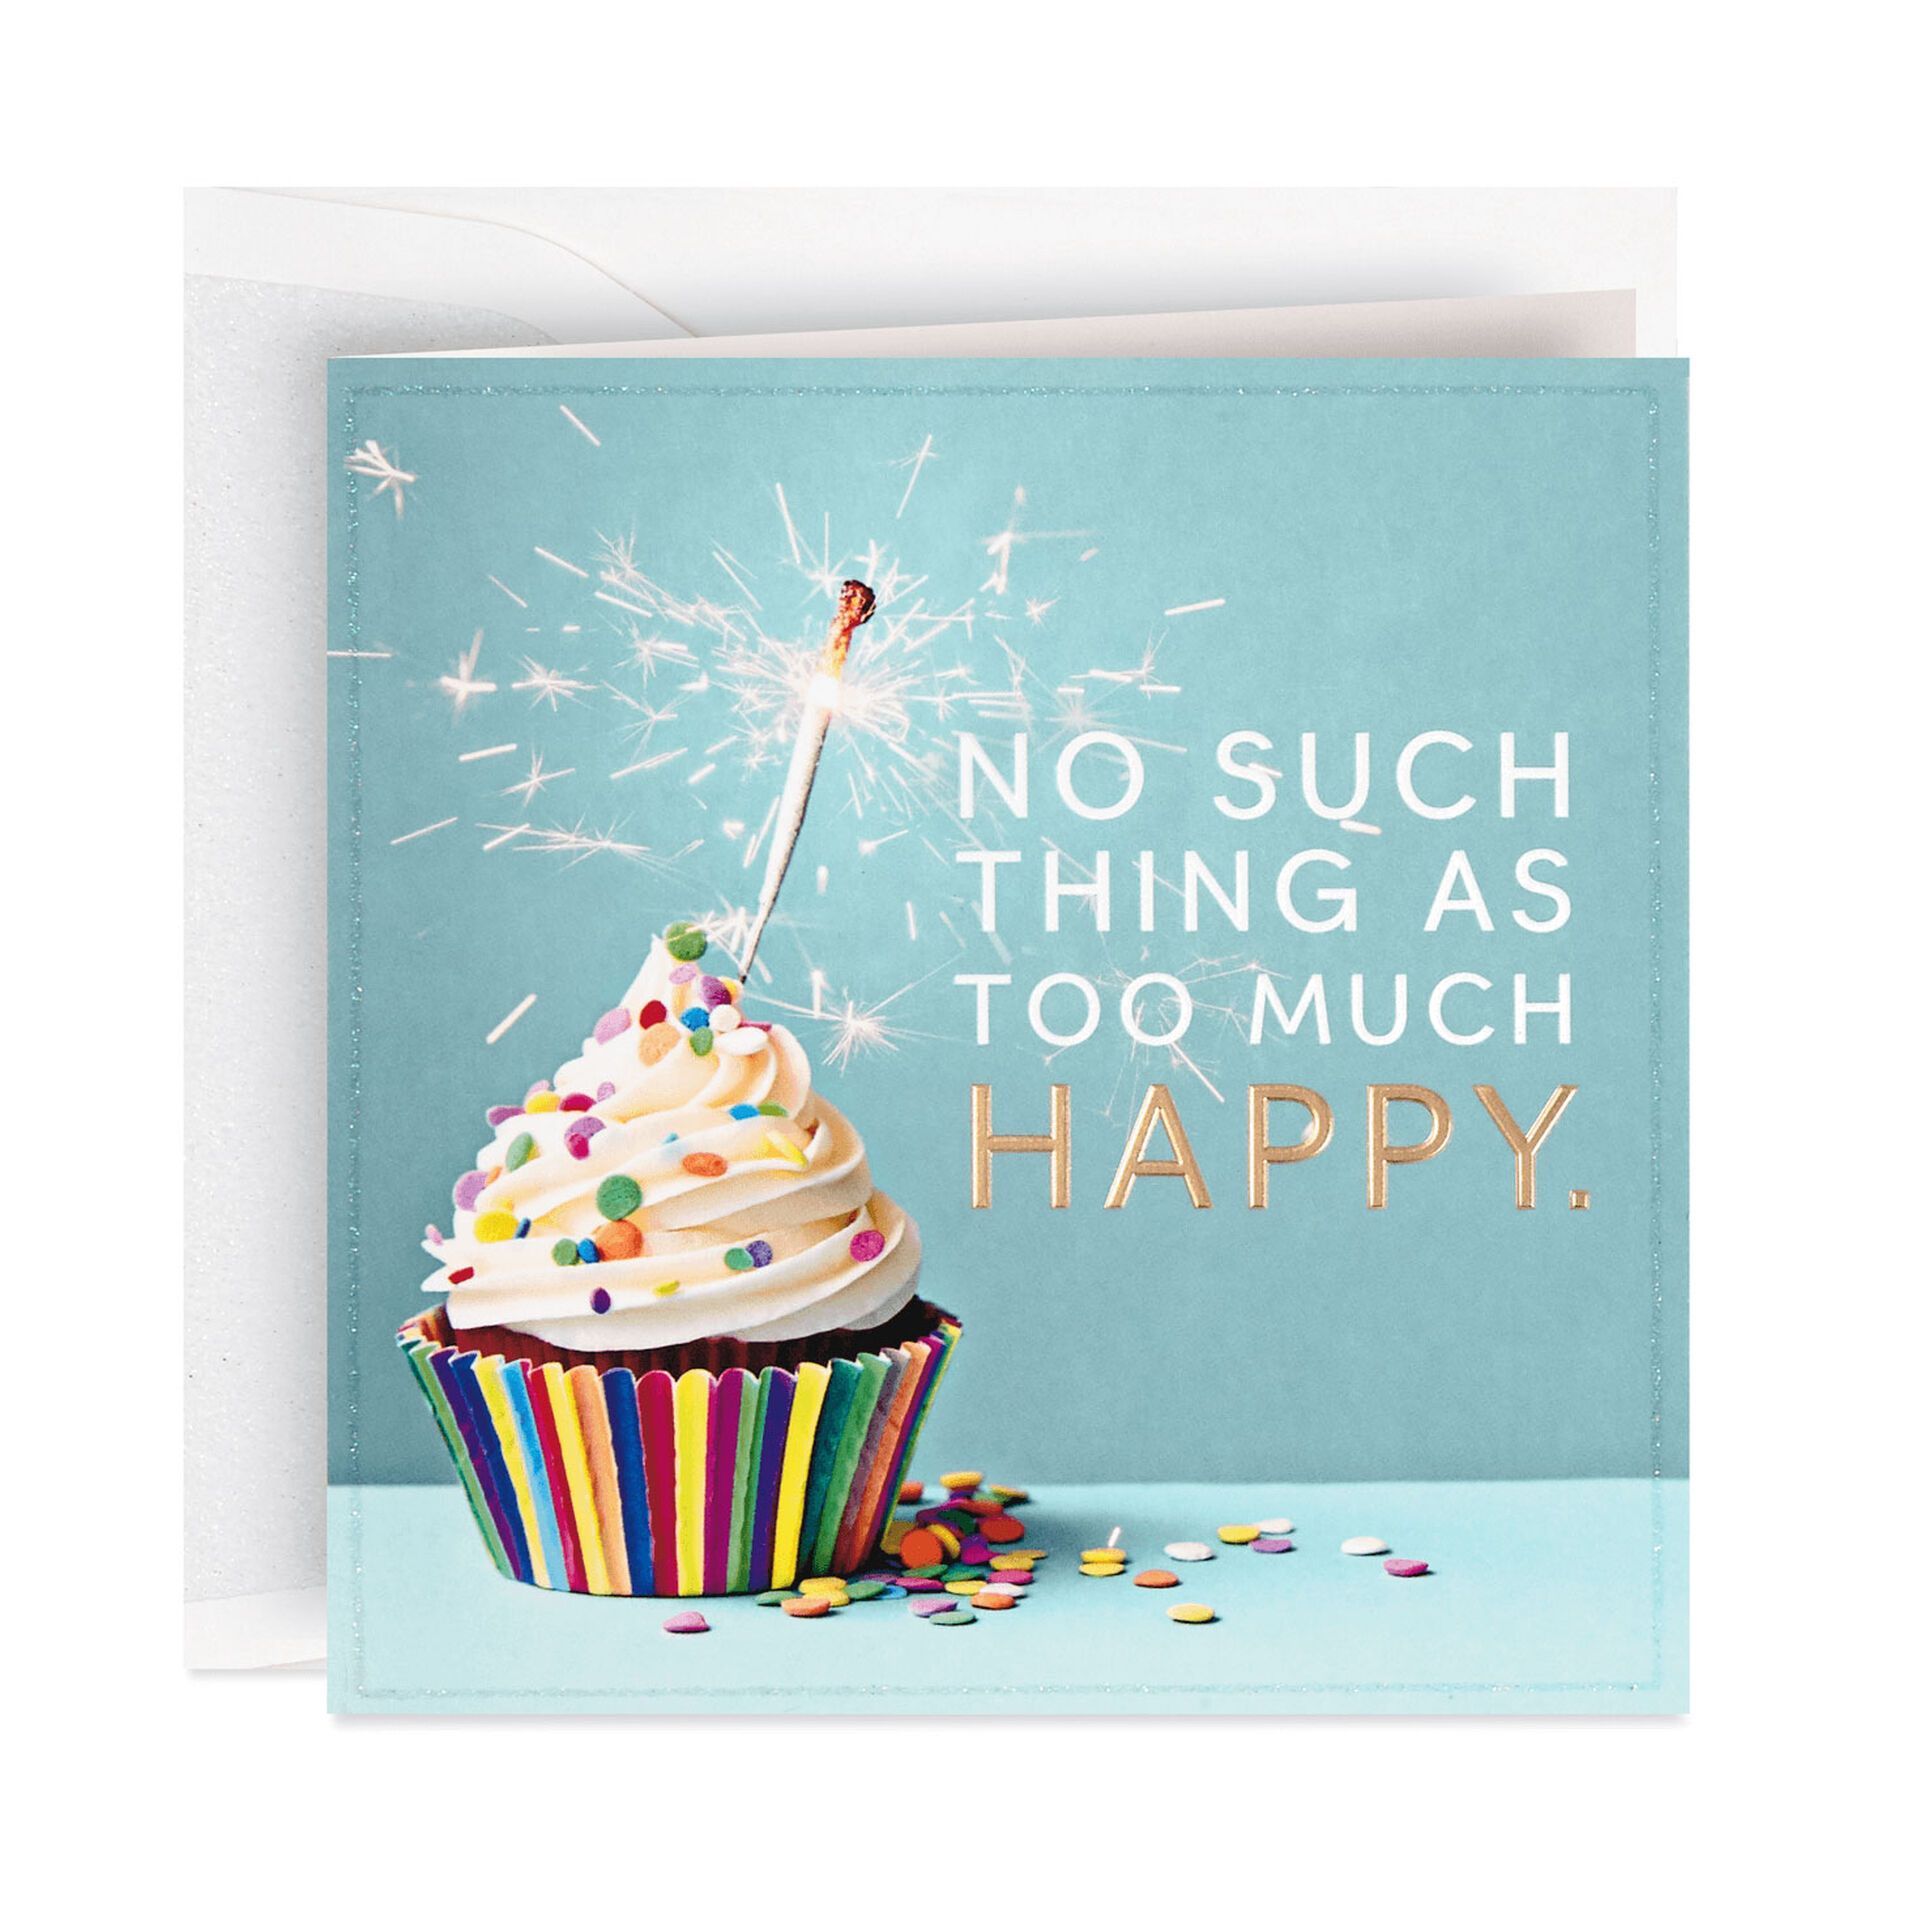 Cupcake-With-Sparkler-Candle-Birthday-Card_599LAD9447_01